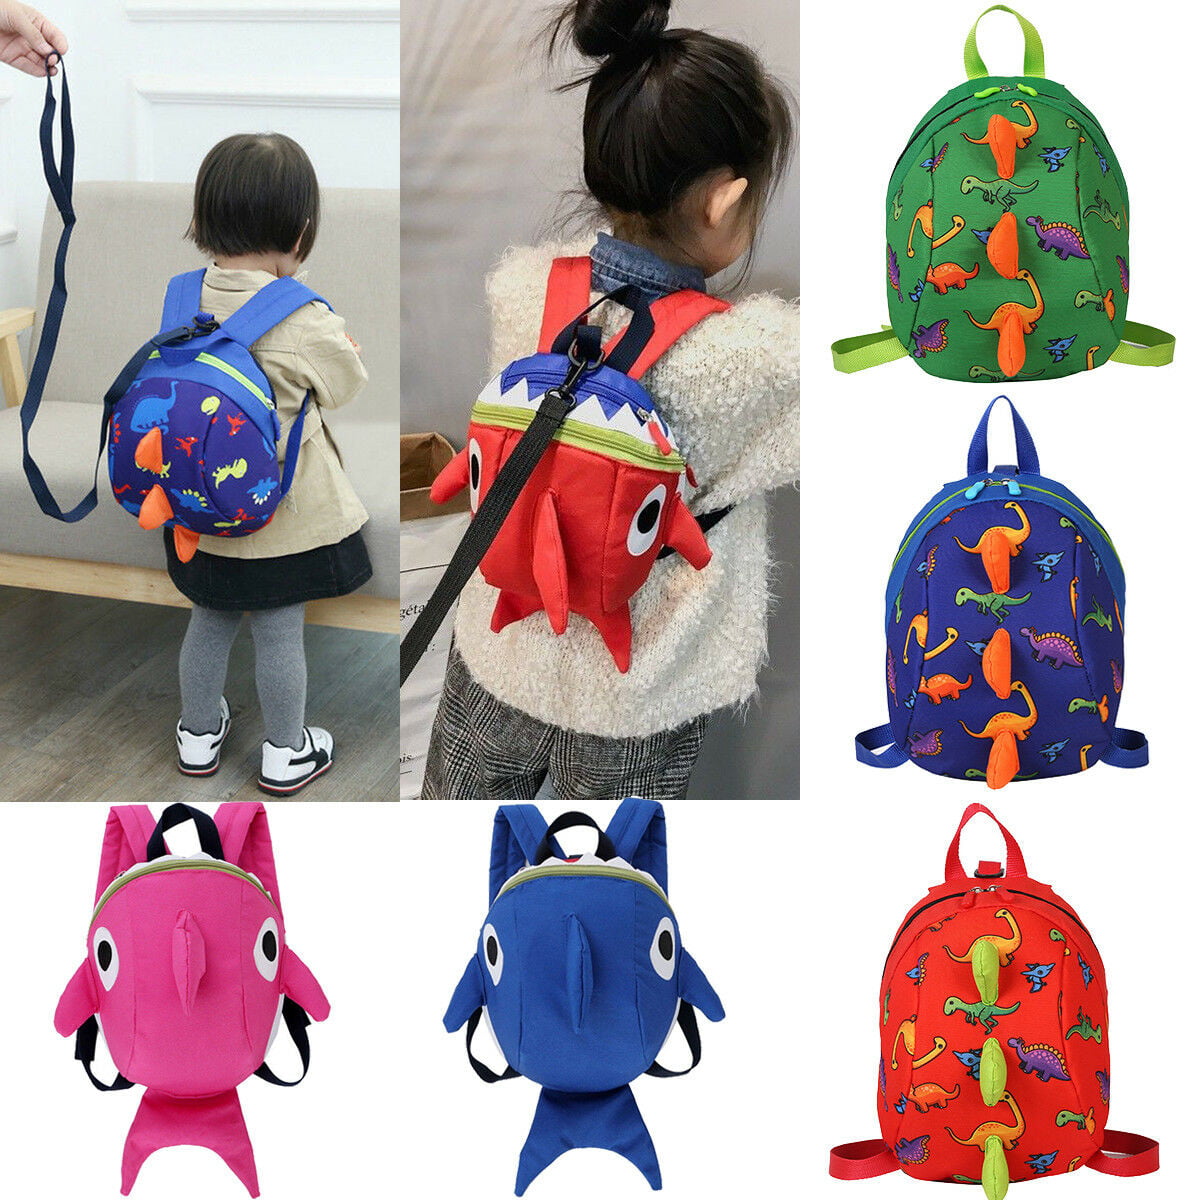 Green Toddlers Anti-Lost Backpack,Unicorn Child Baby Walking Safety Harness Mini Bag with Safety Leash for 1-3 Years Old Boys and Girls